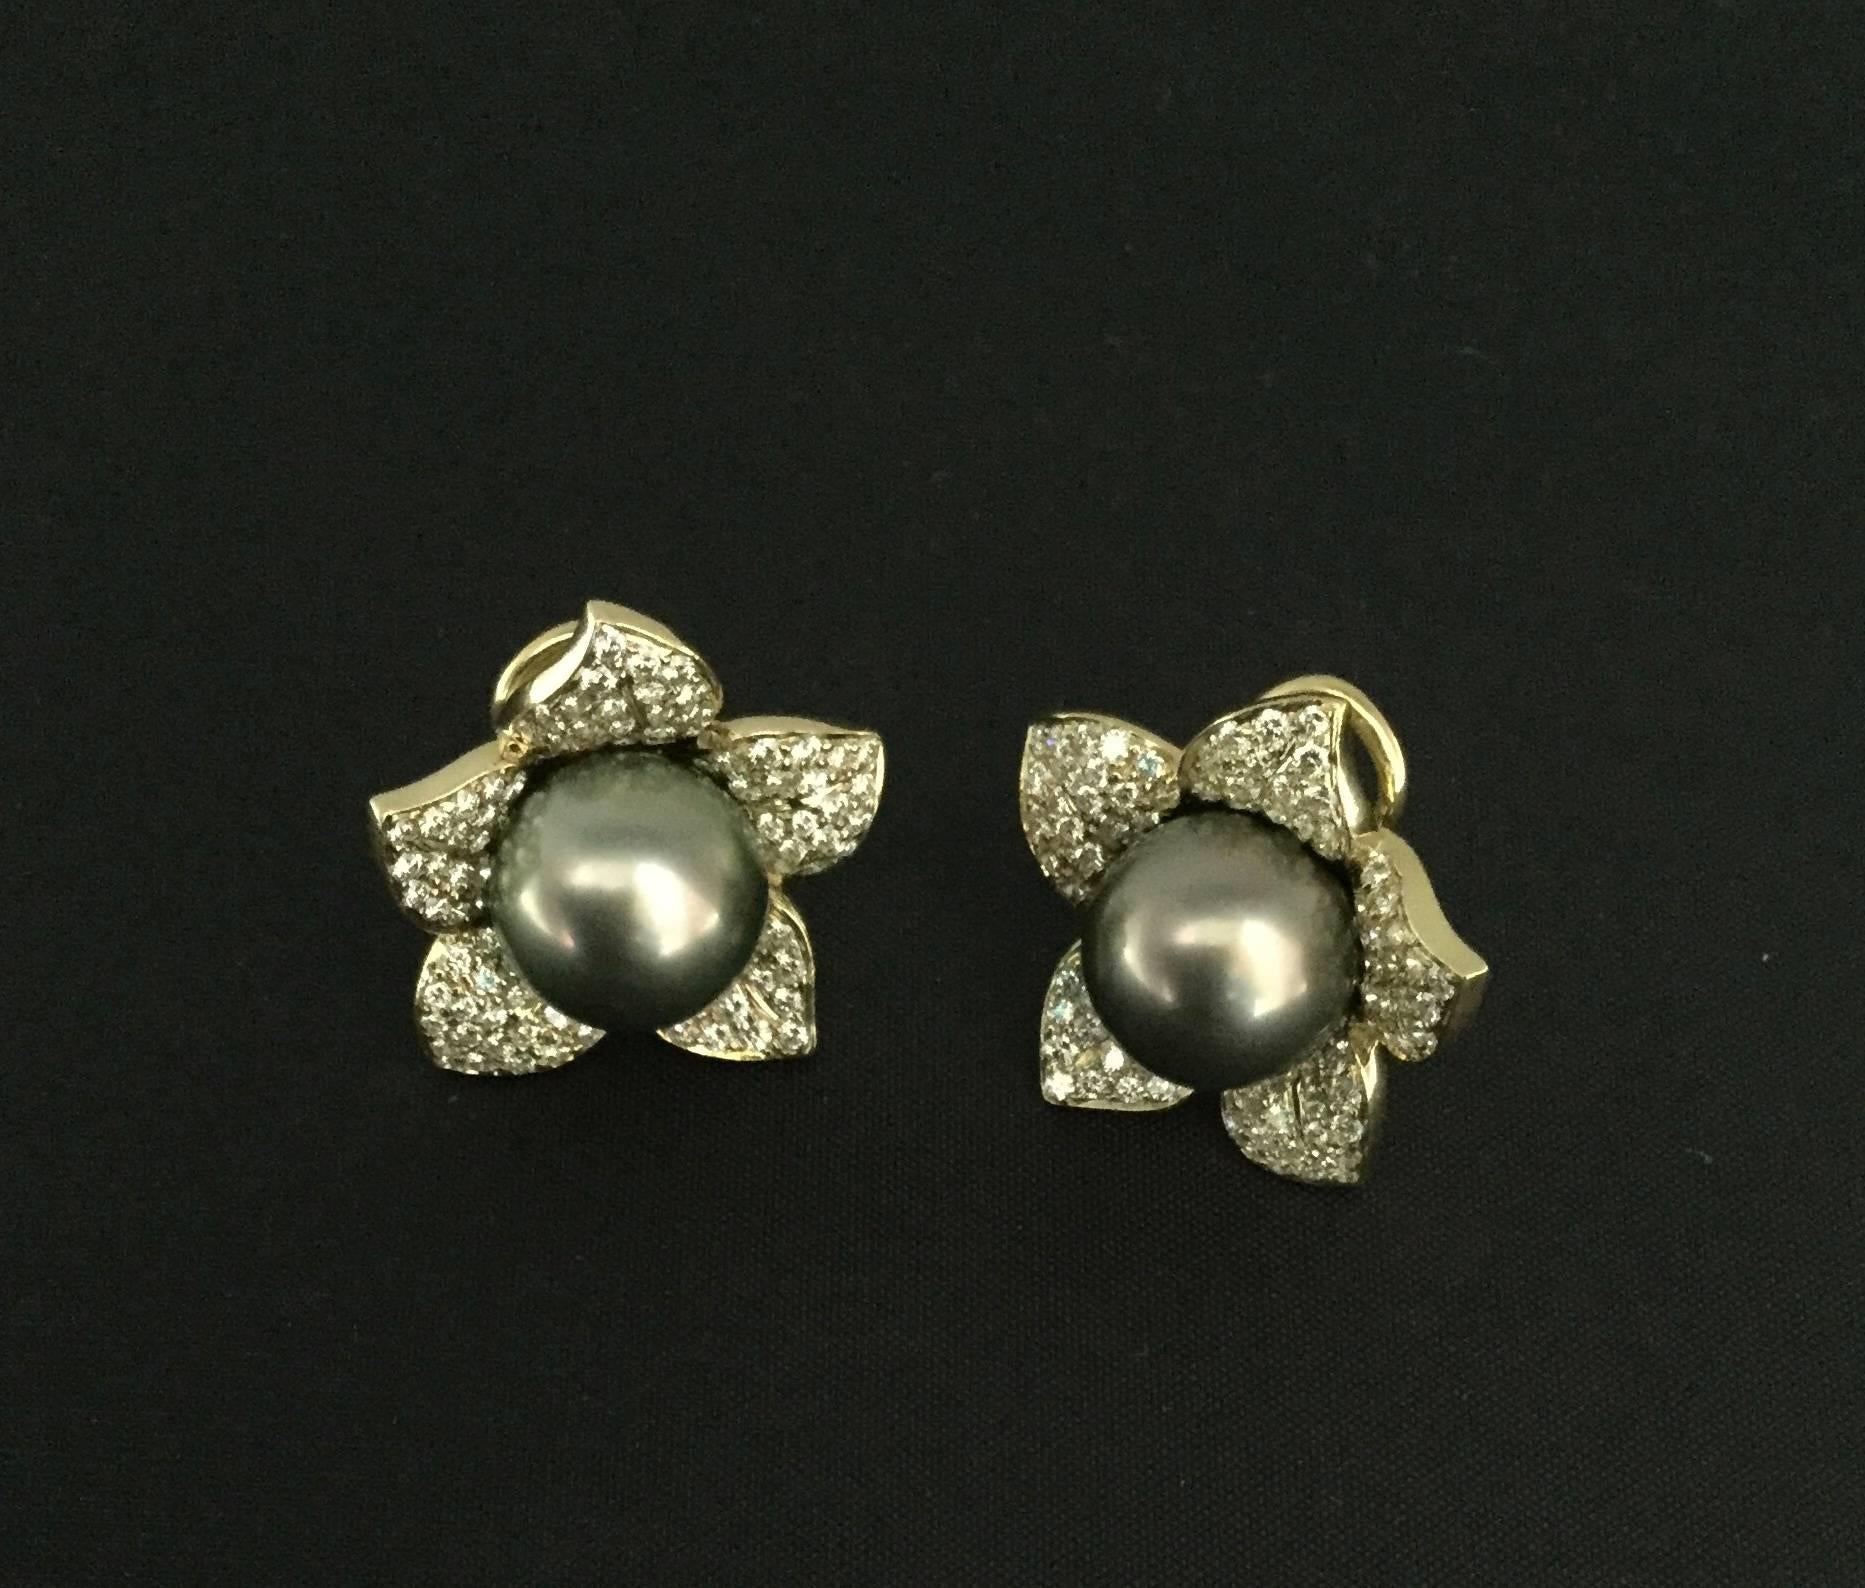 Gumuchian 18K yellow gold flower design earrings with dark Pistachio pearls and diamonds.
The pistachio pearls are 11.5 mm